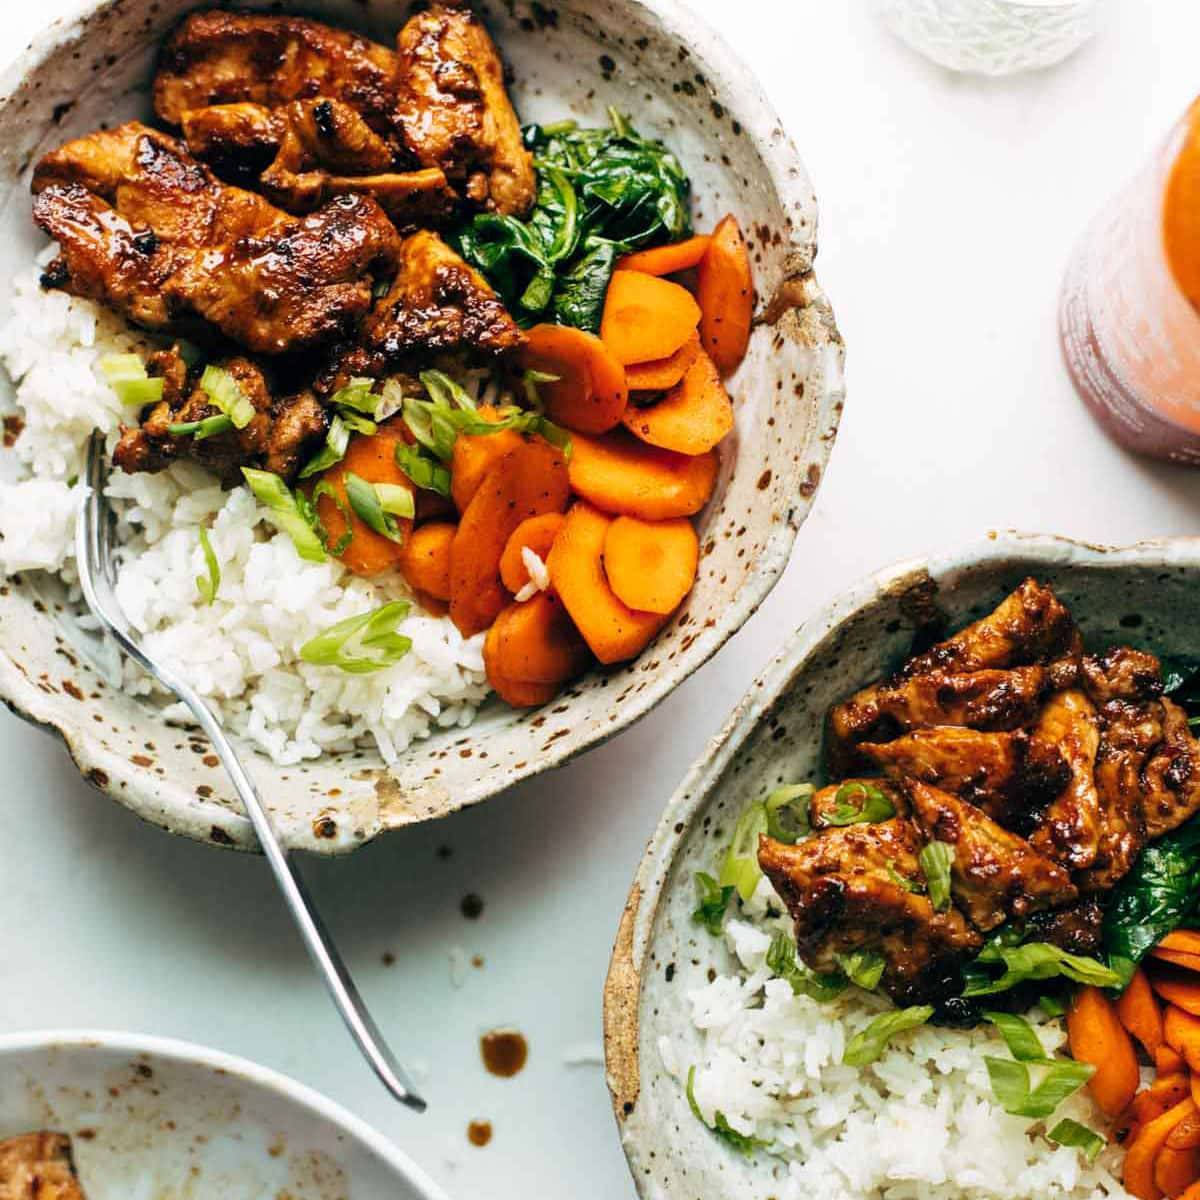 Spicy pork covered in sauce, wilted spinach, and carrots with white rice.